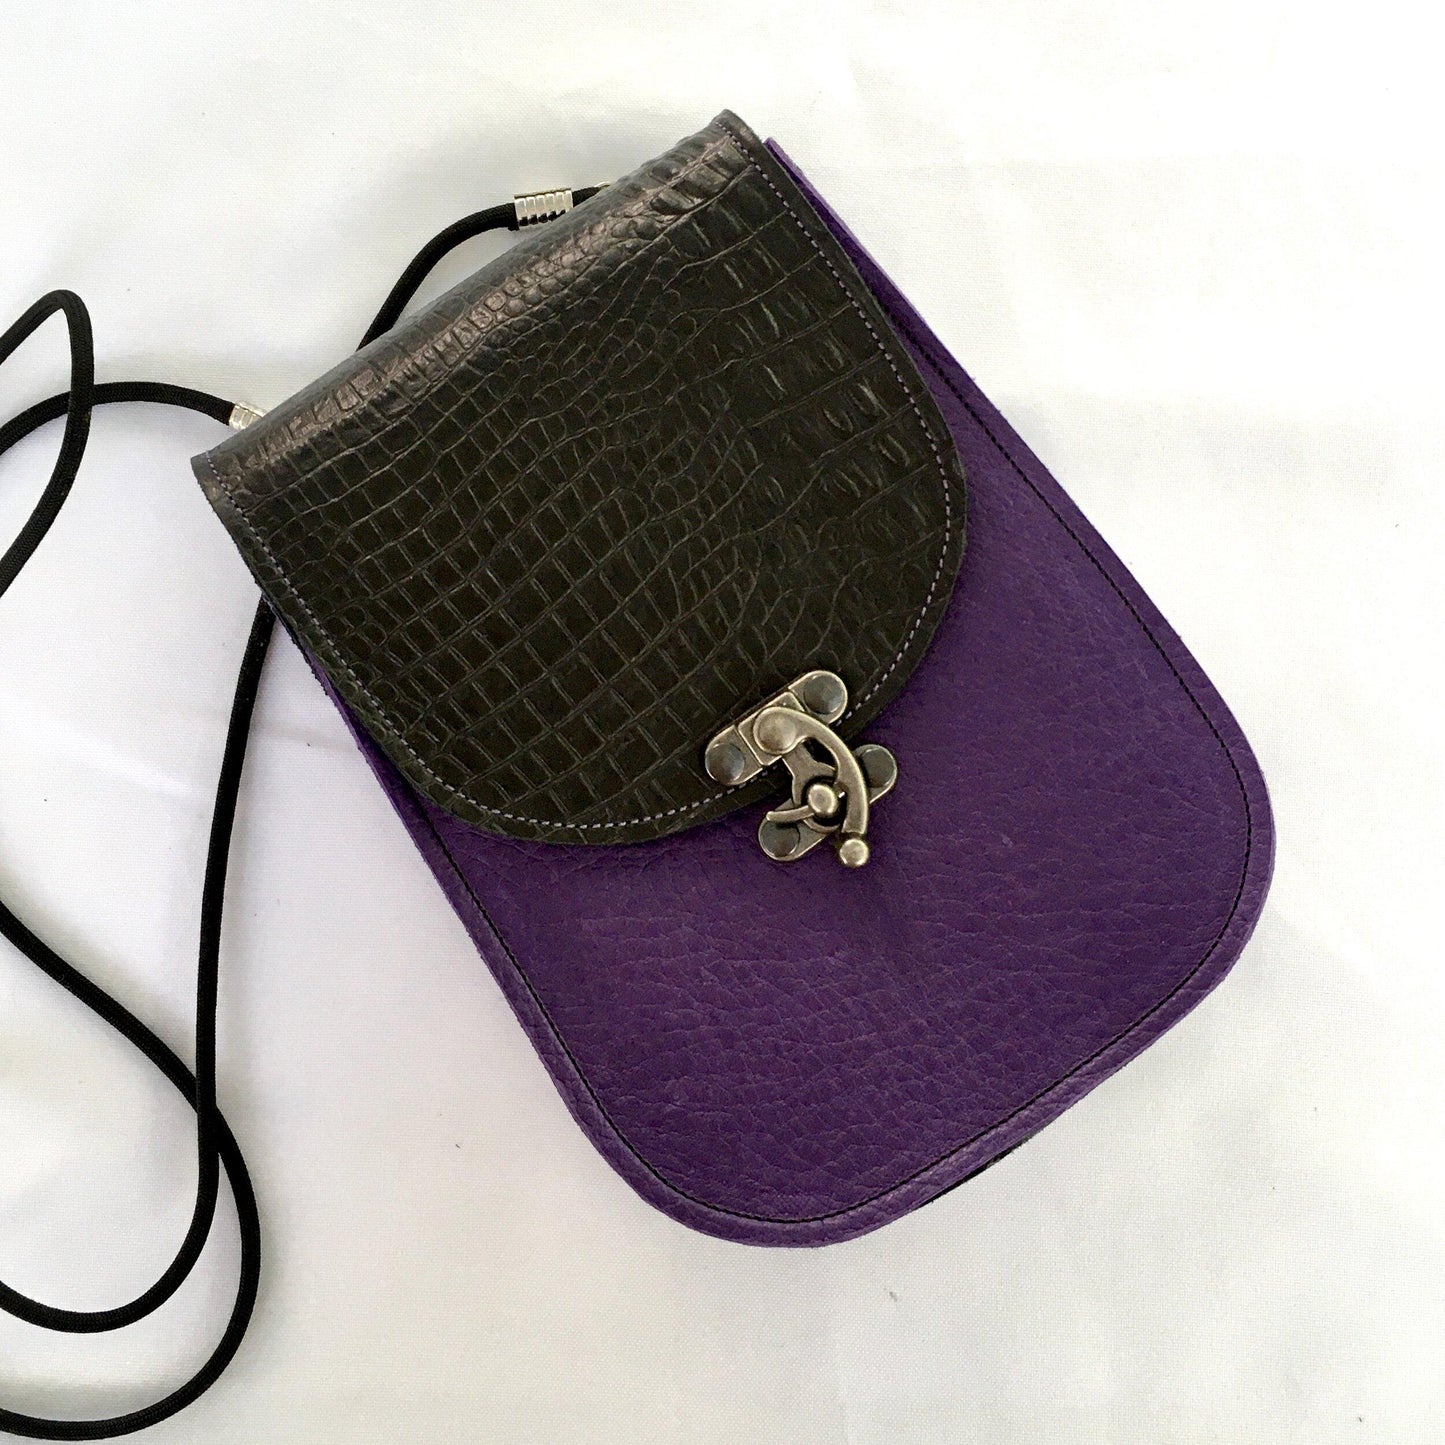 Essentials convertible bag Purple with Black flap and side gusset